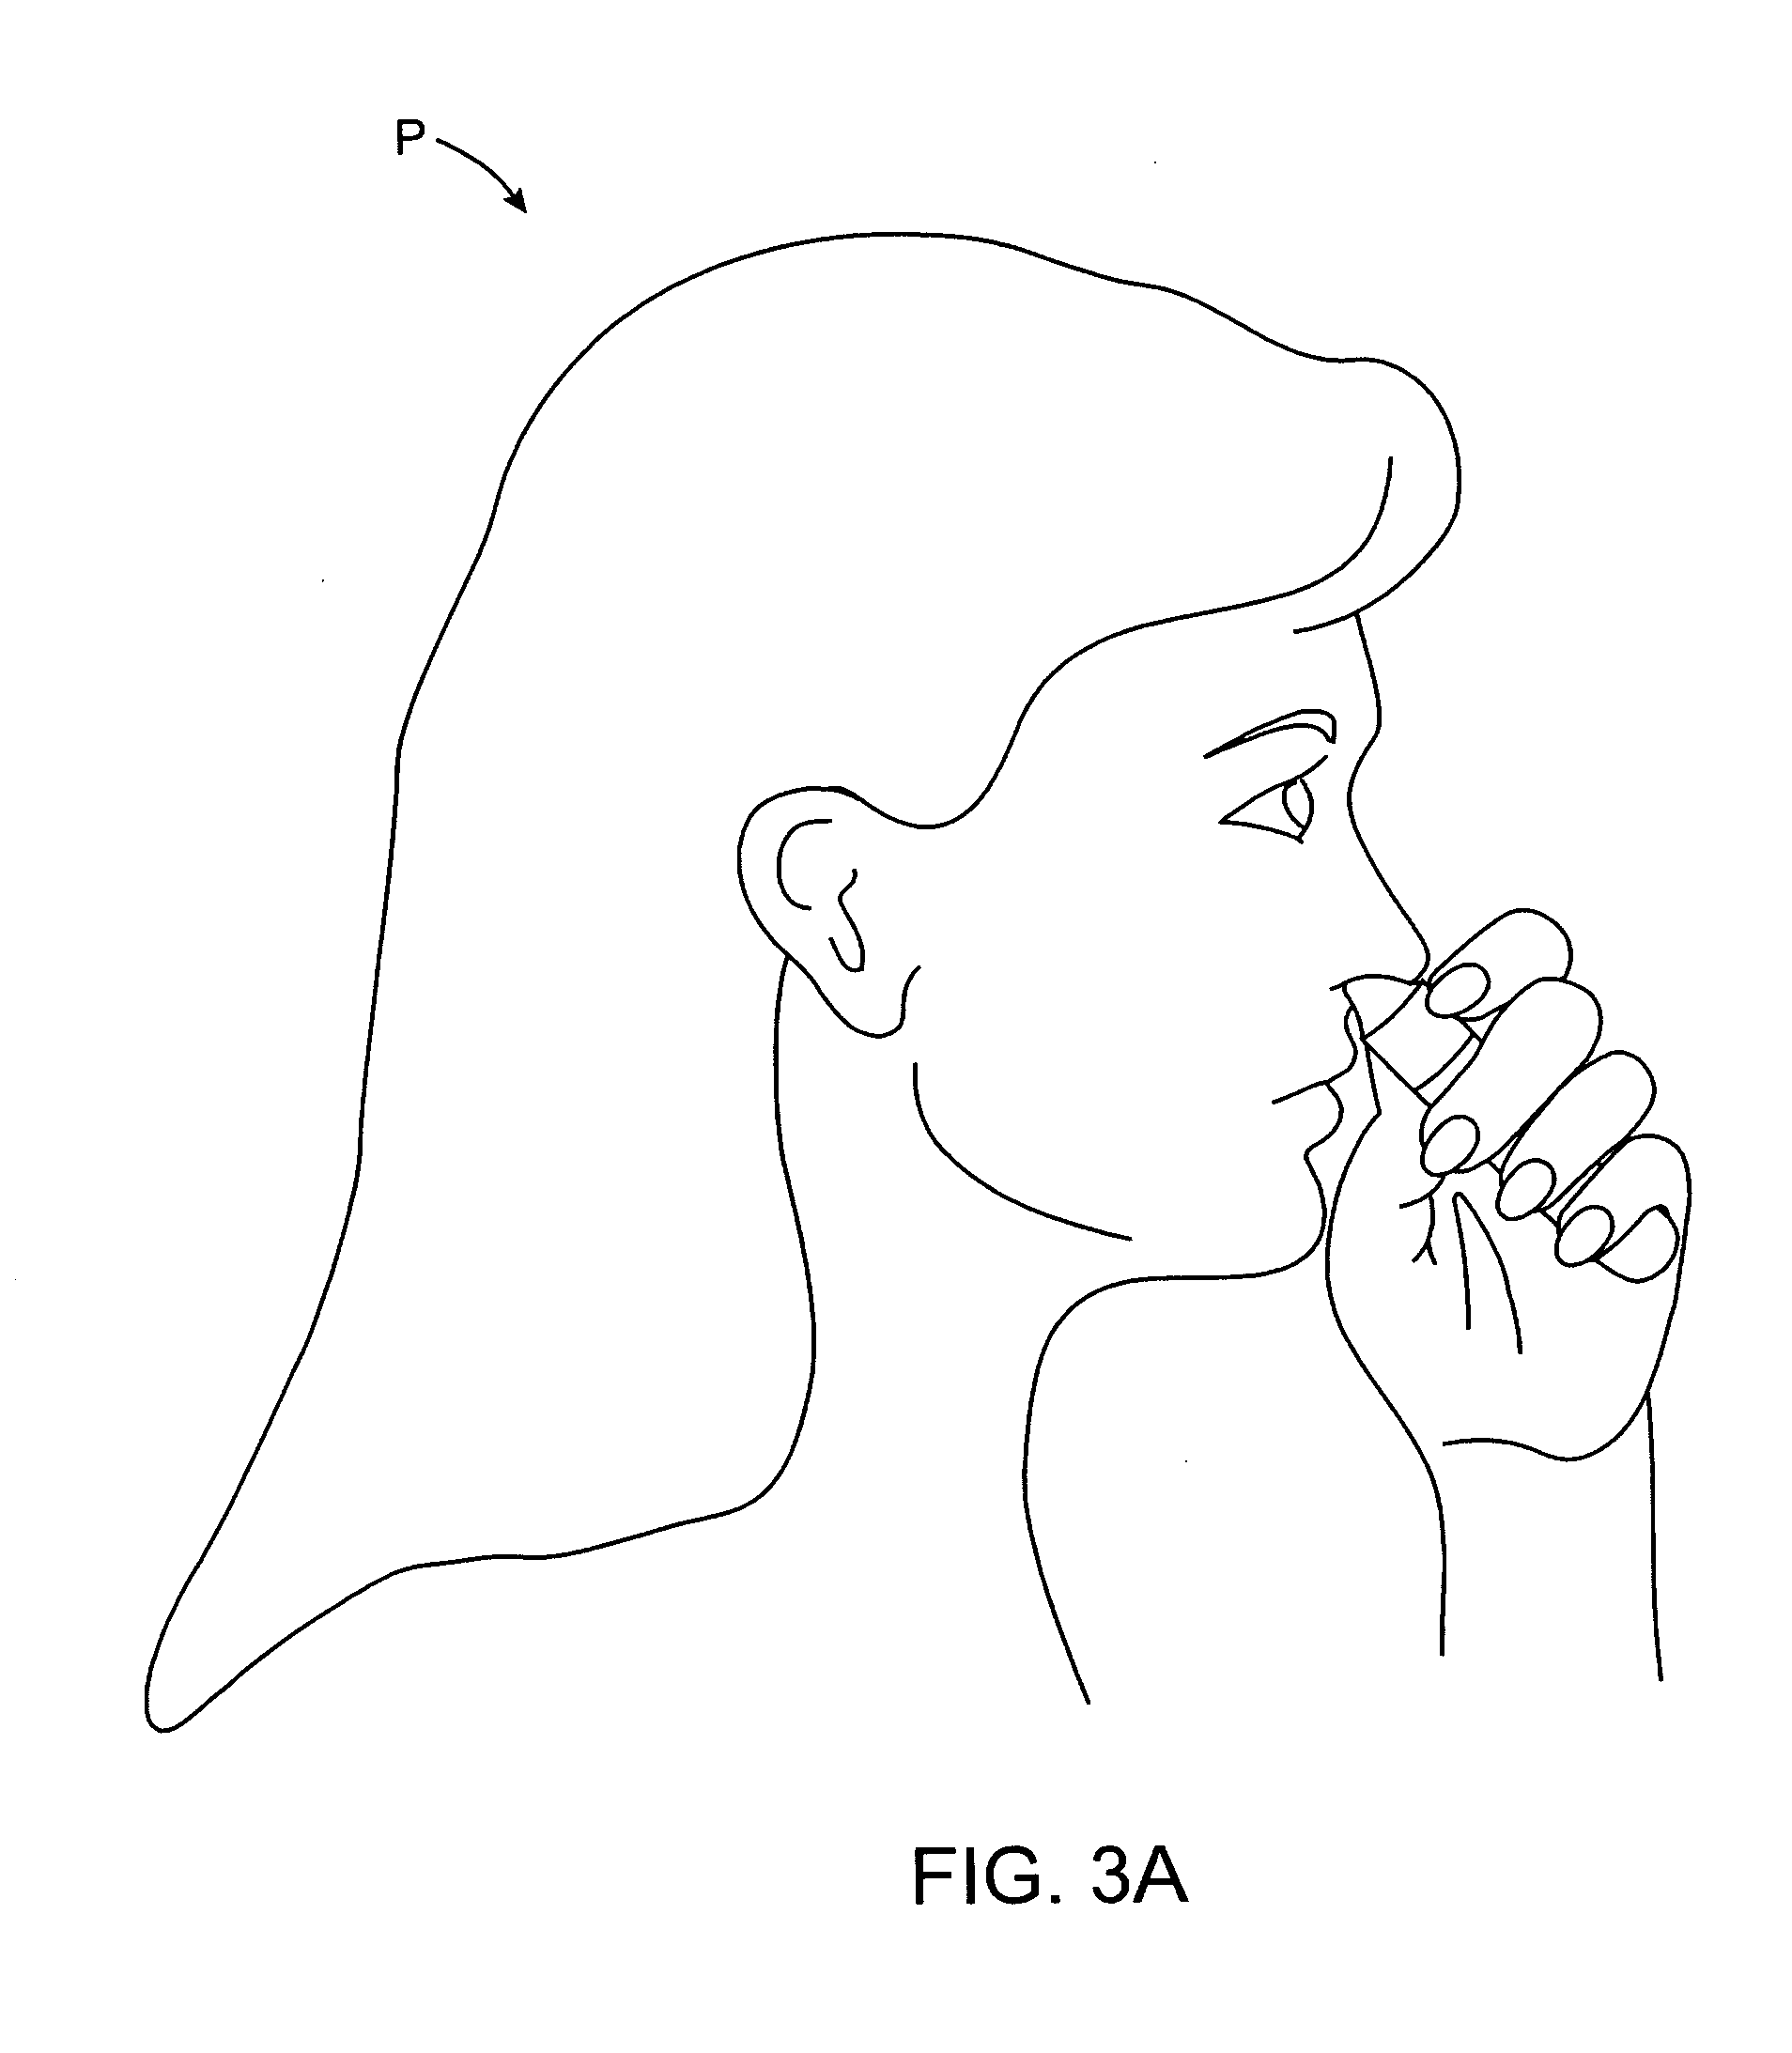 Methods and apparatus for the enhanced delivery of physiologic agents to tissue surfaces